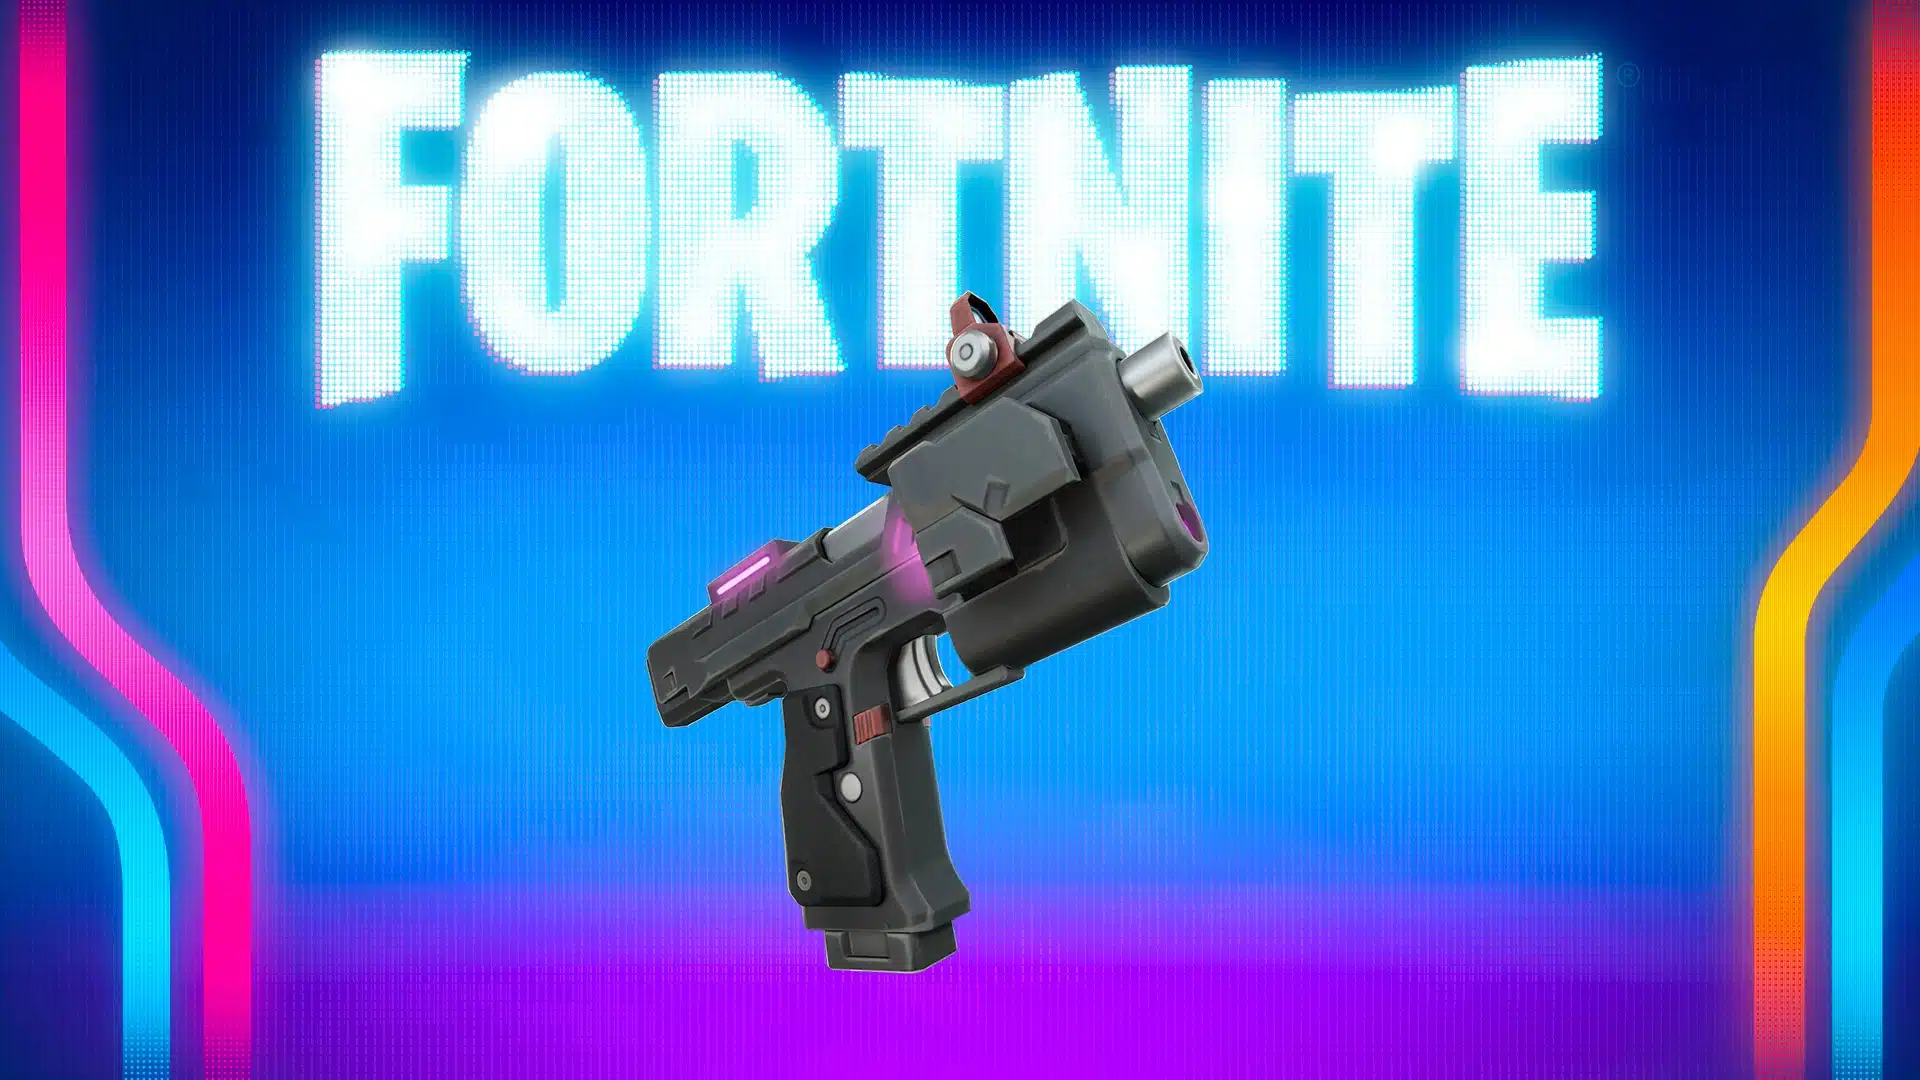 Where to Find Lock On Pistol in Fortnite?